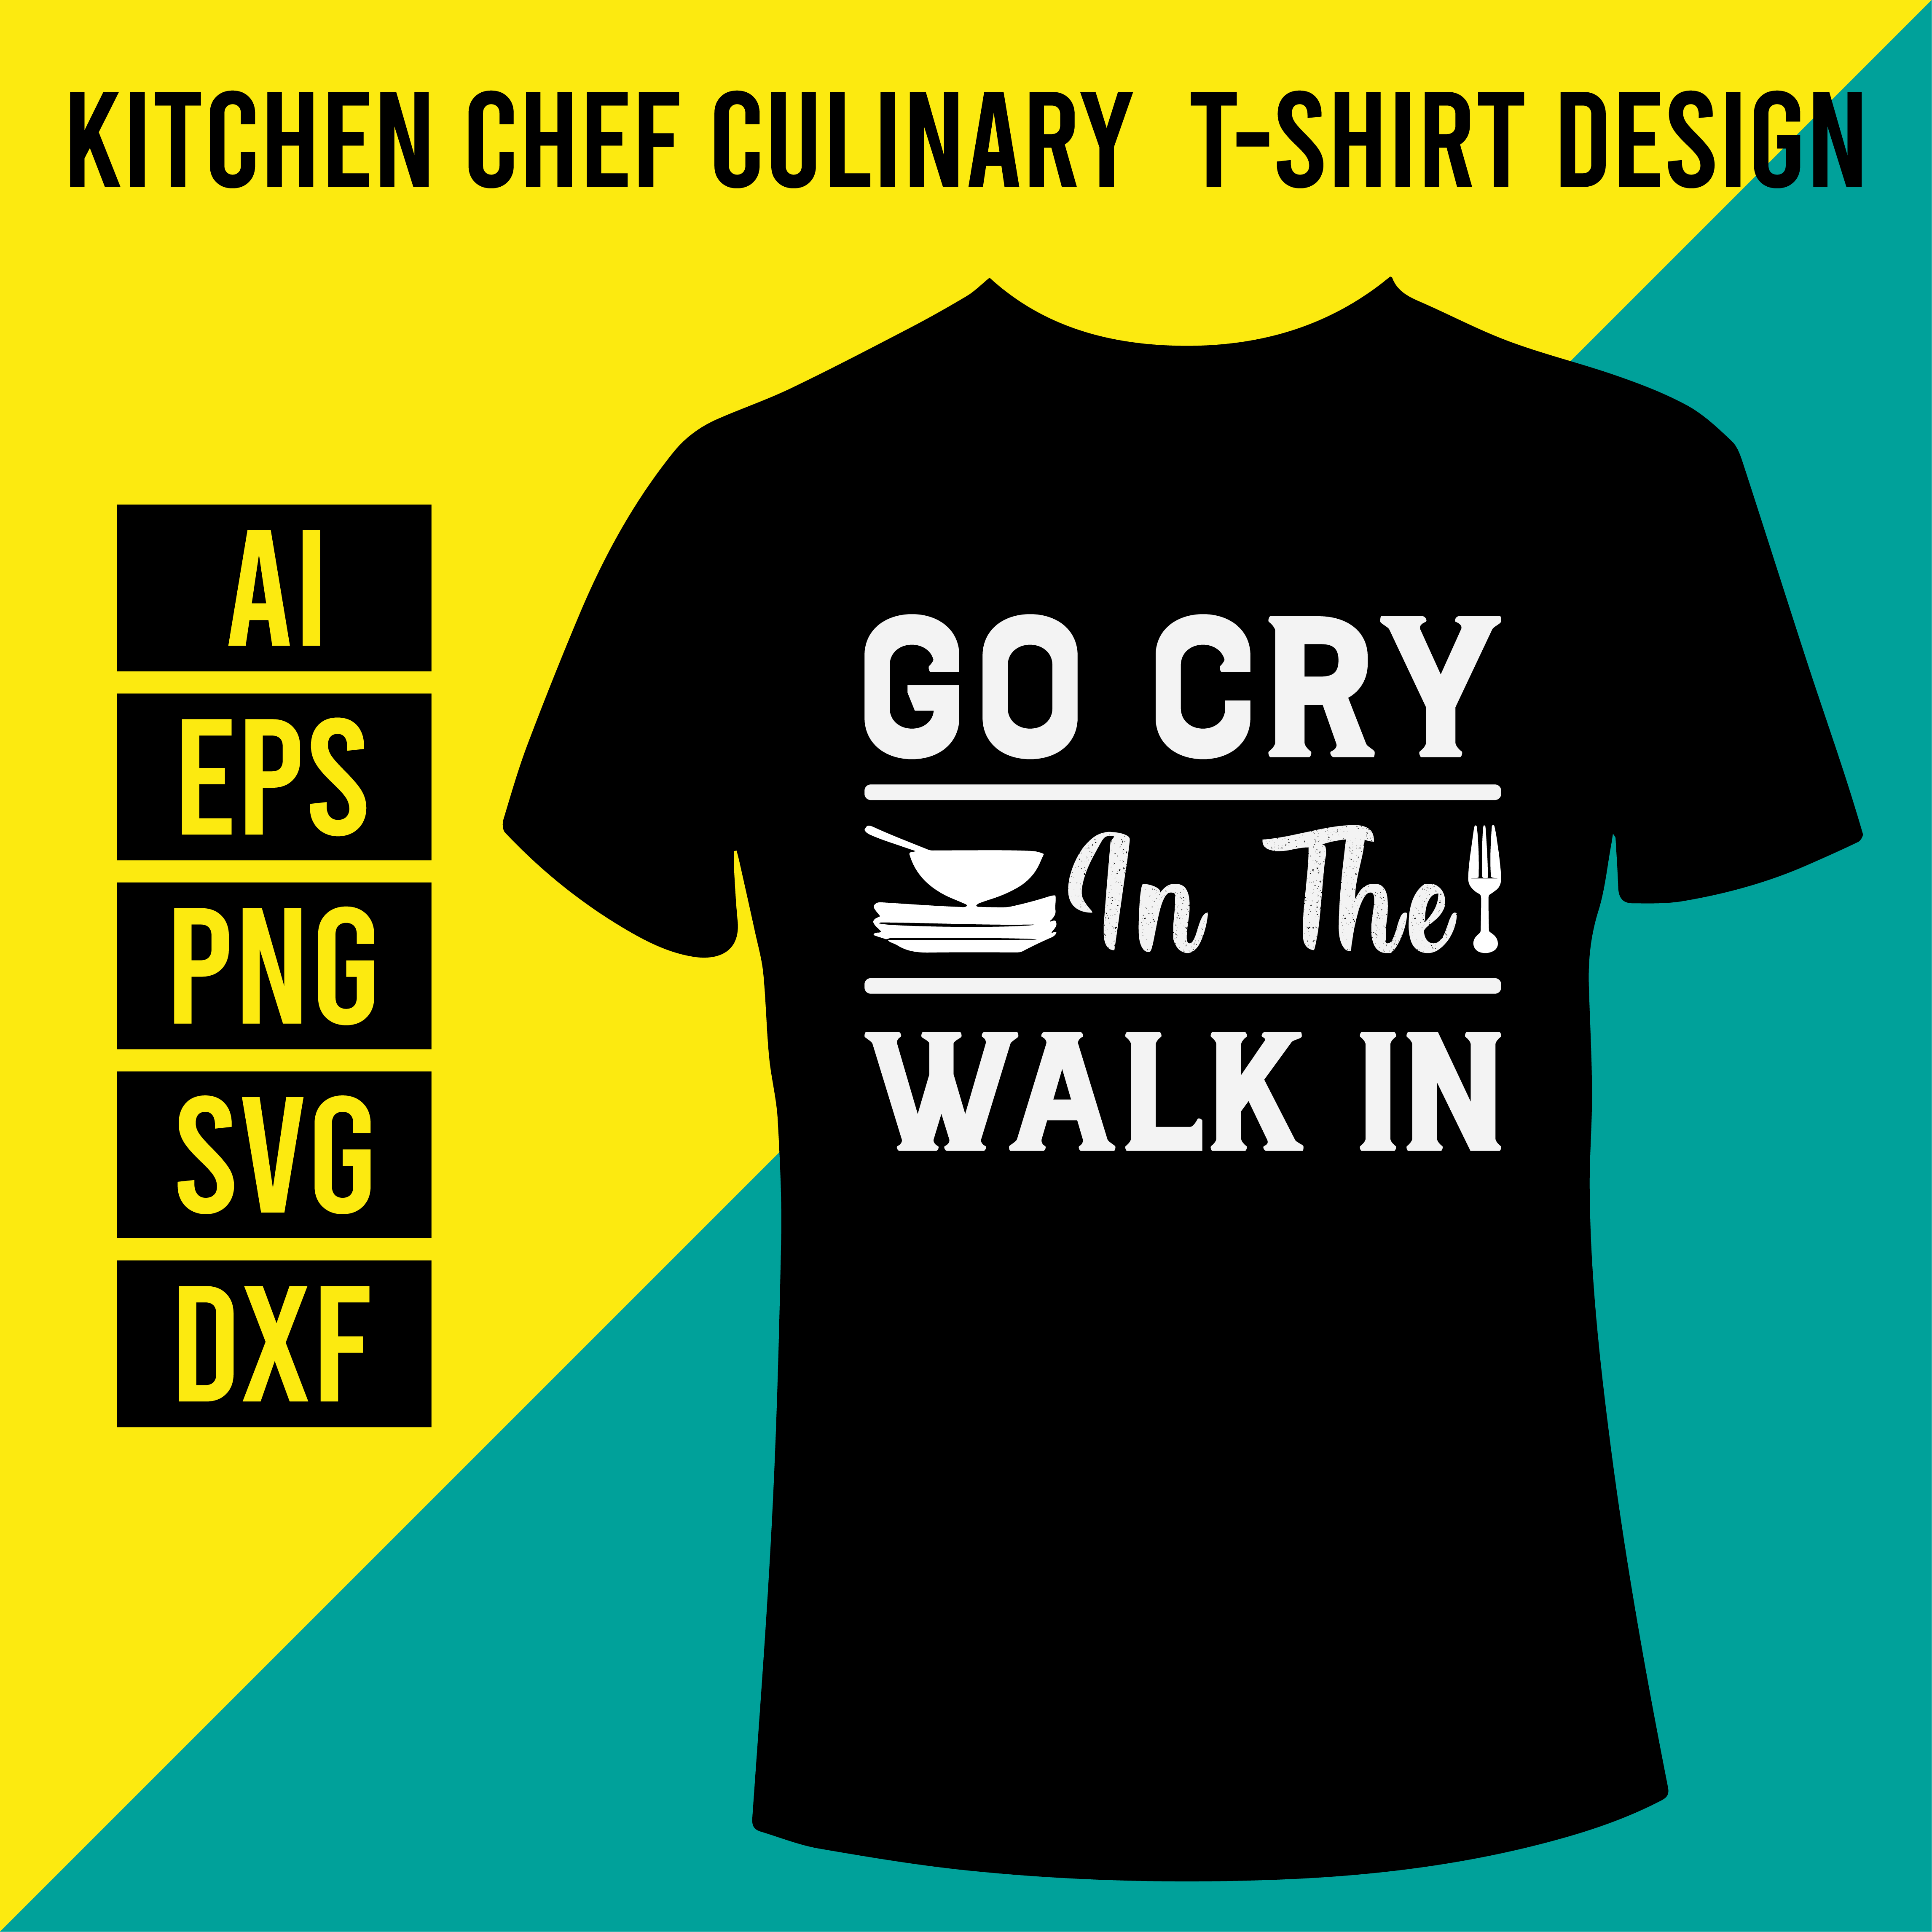 Kitchen Chef Culinary T-Shirt Design cover image.